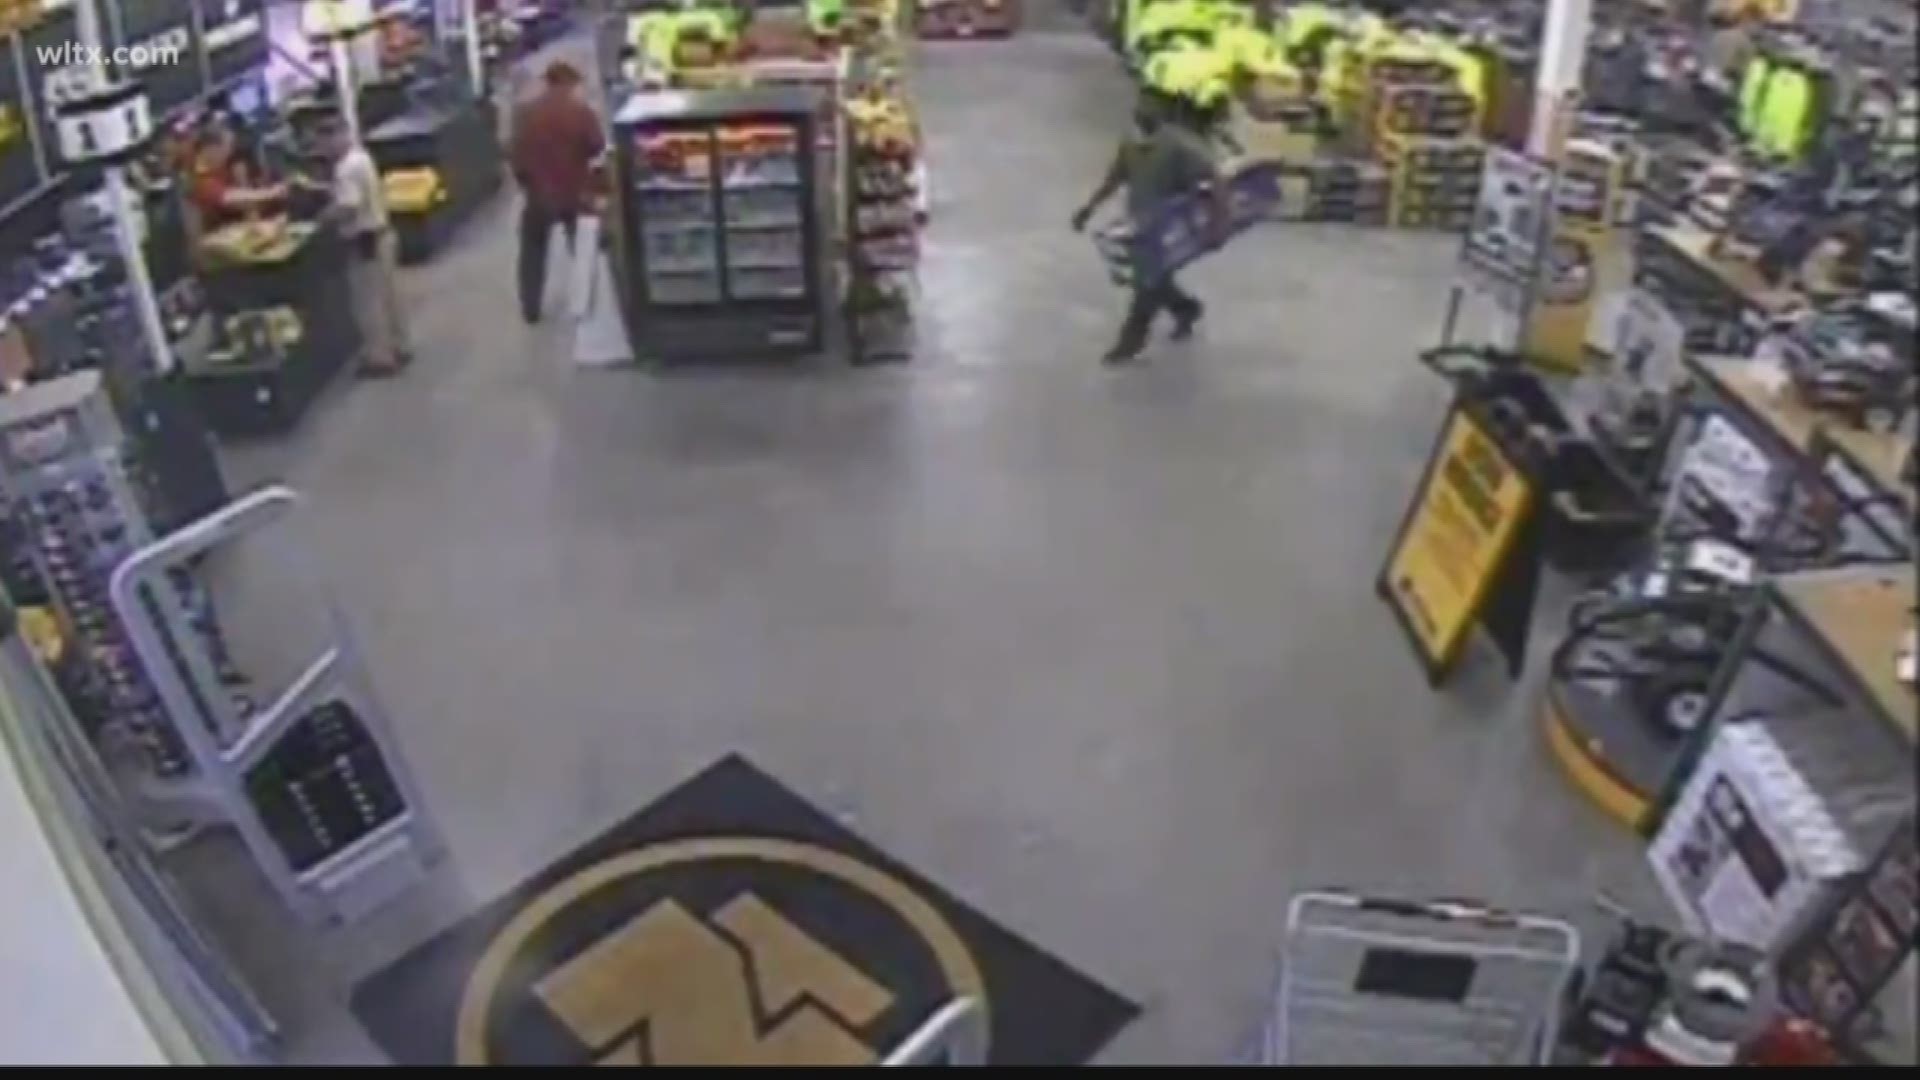 Lexington deputies are searching for a suspect who they say stole a chainsaw, then assaulted an employee who tried to stop him.